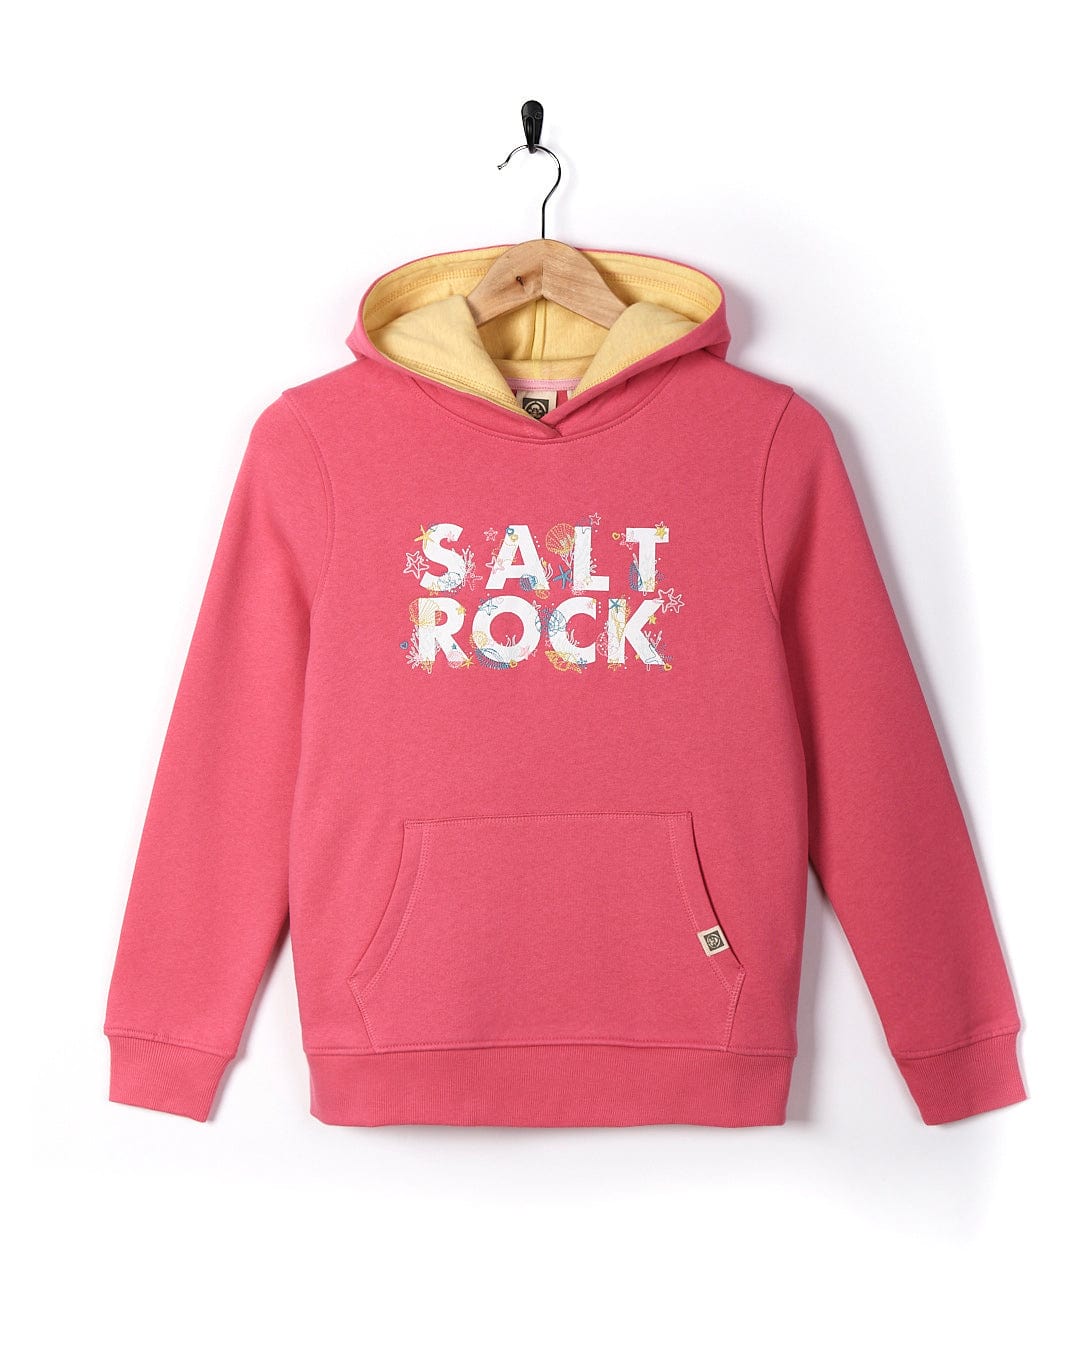 A Seabed - Kids Pop Hoodie - Pink with the brand name Saltrock on it.